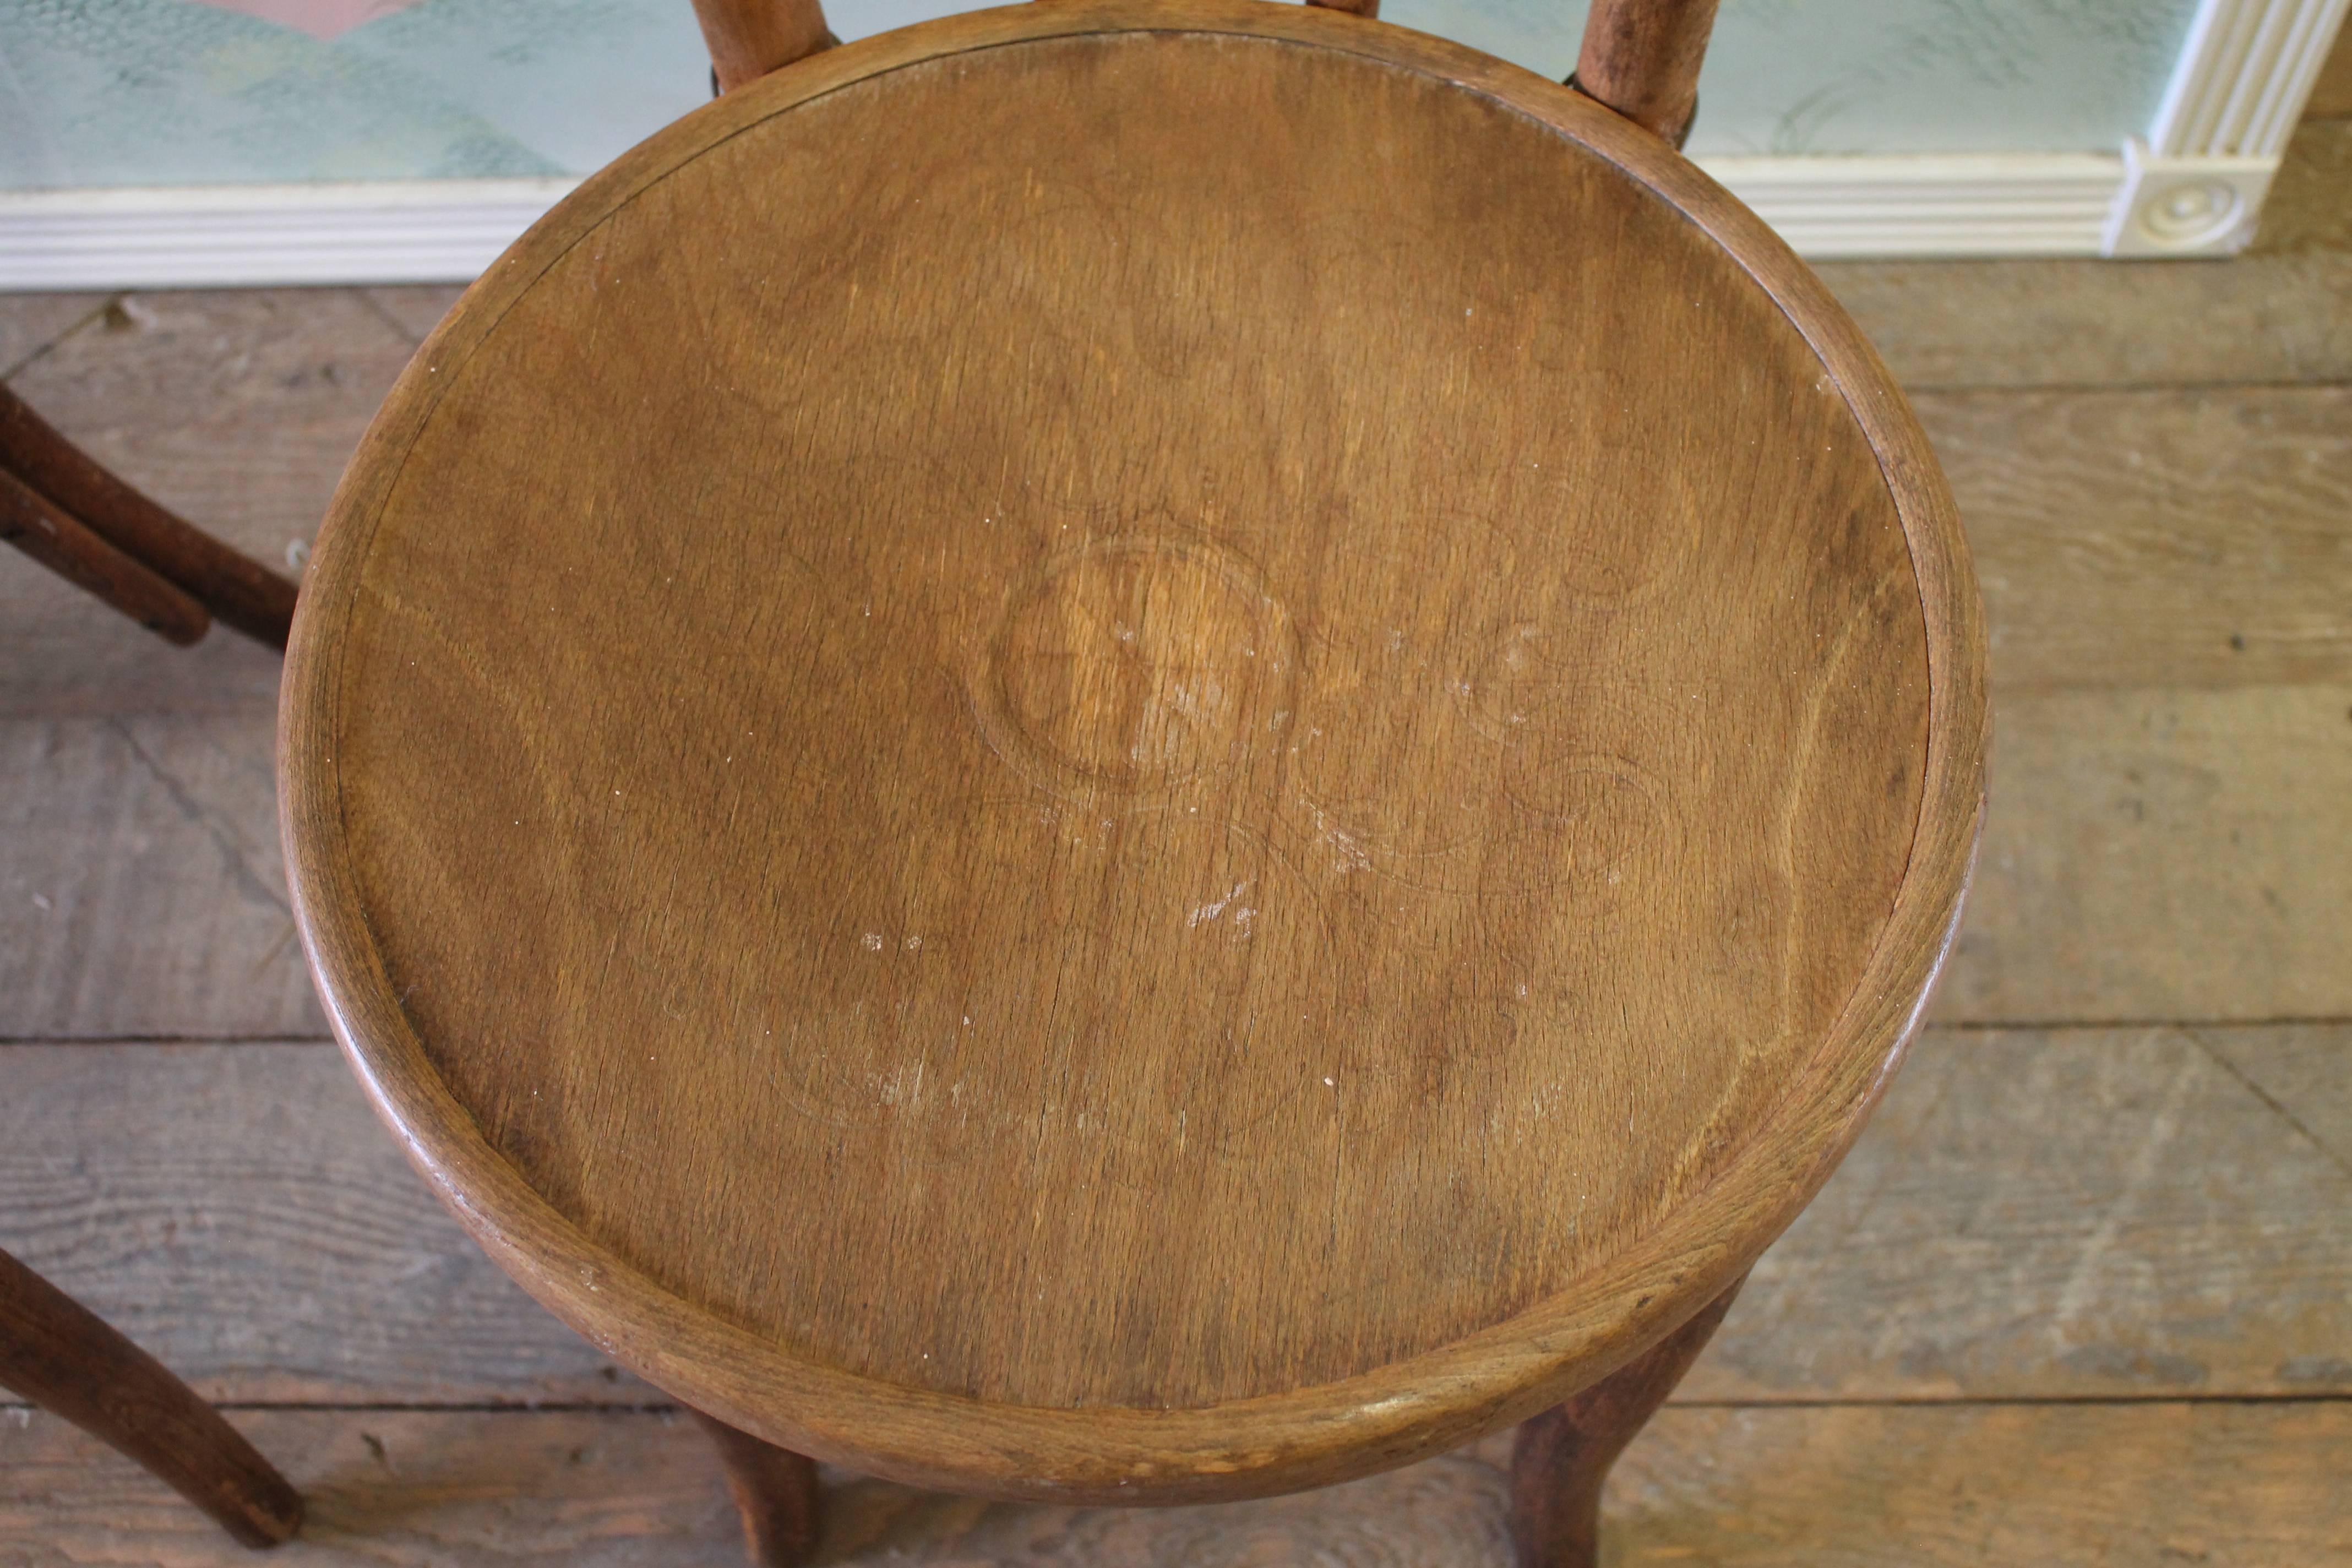 antique bentwood chairs